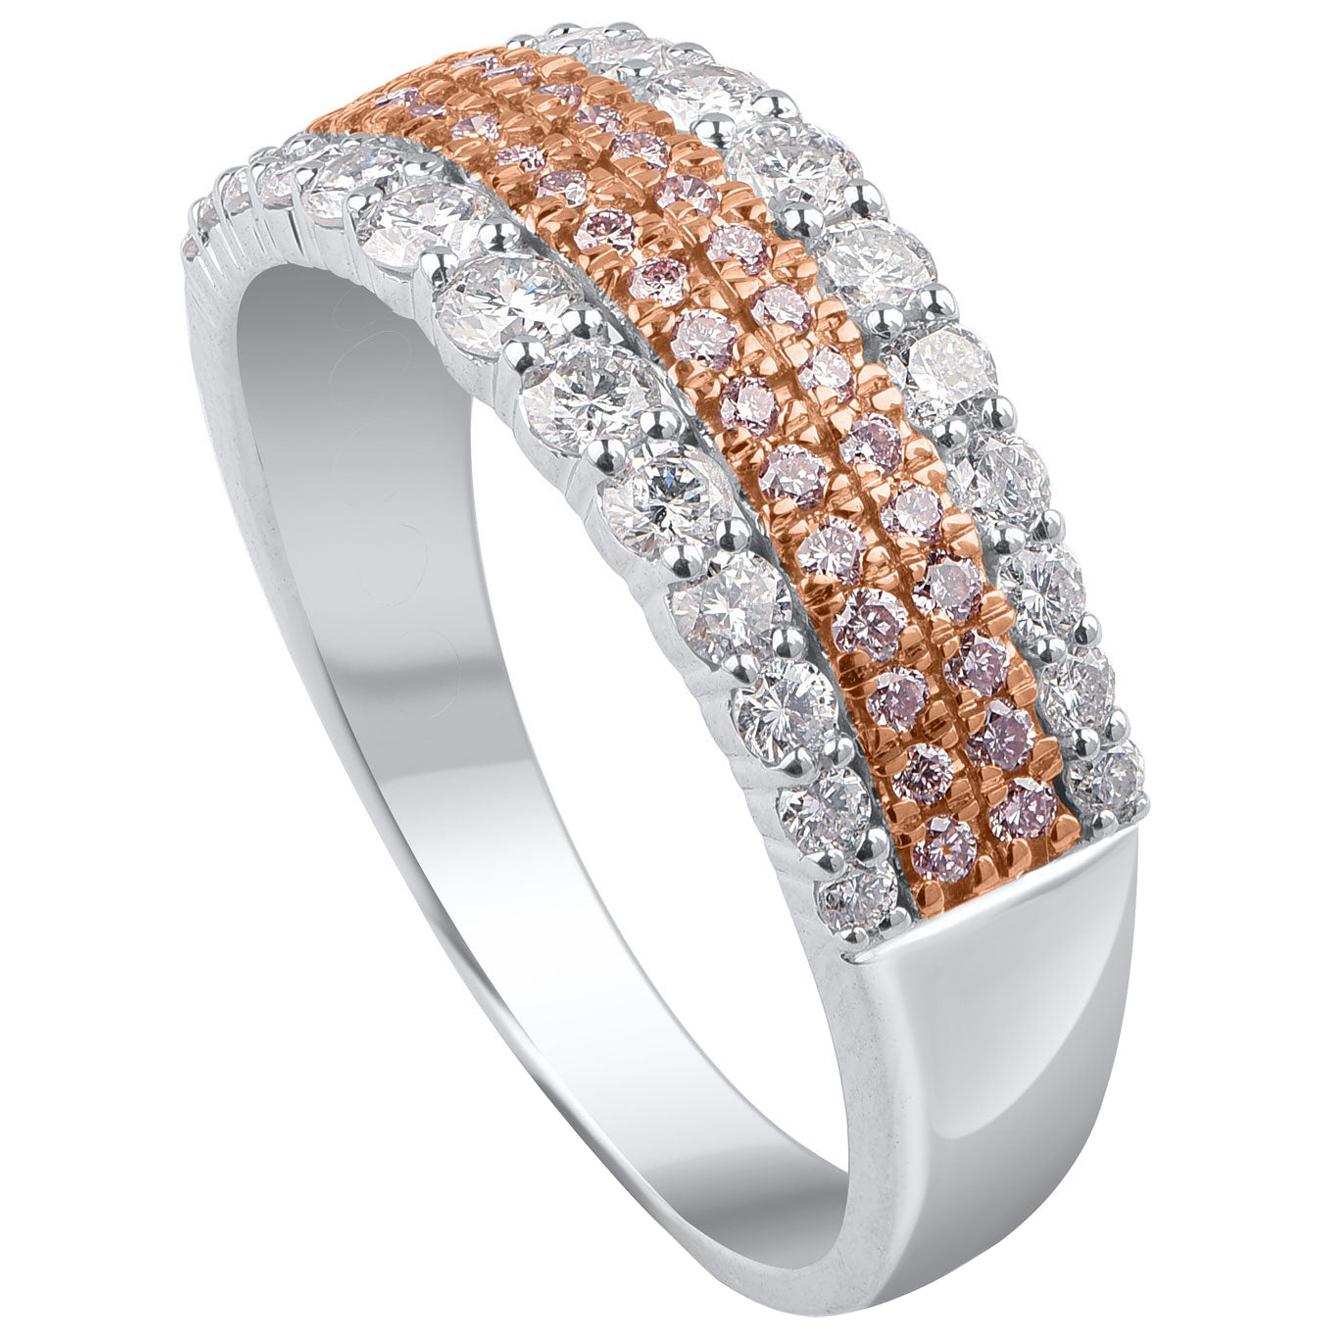 Timeless and elegant, this diamond band is studded with 64 round-cut natural pink rosé and white diamonds in prong and micro-prong setting and hand-crafted beautifully by our in-house experts in 18 KT two tone gold. 

The diamonds are graded H-I